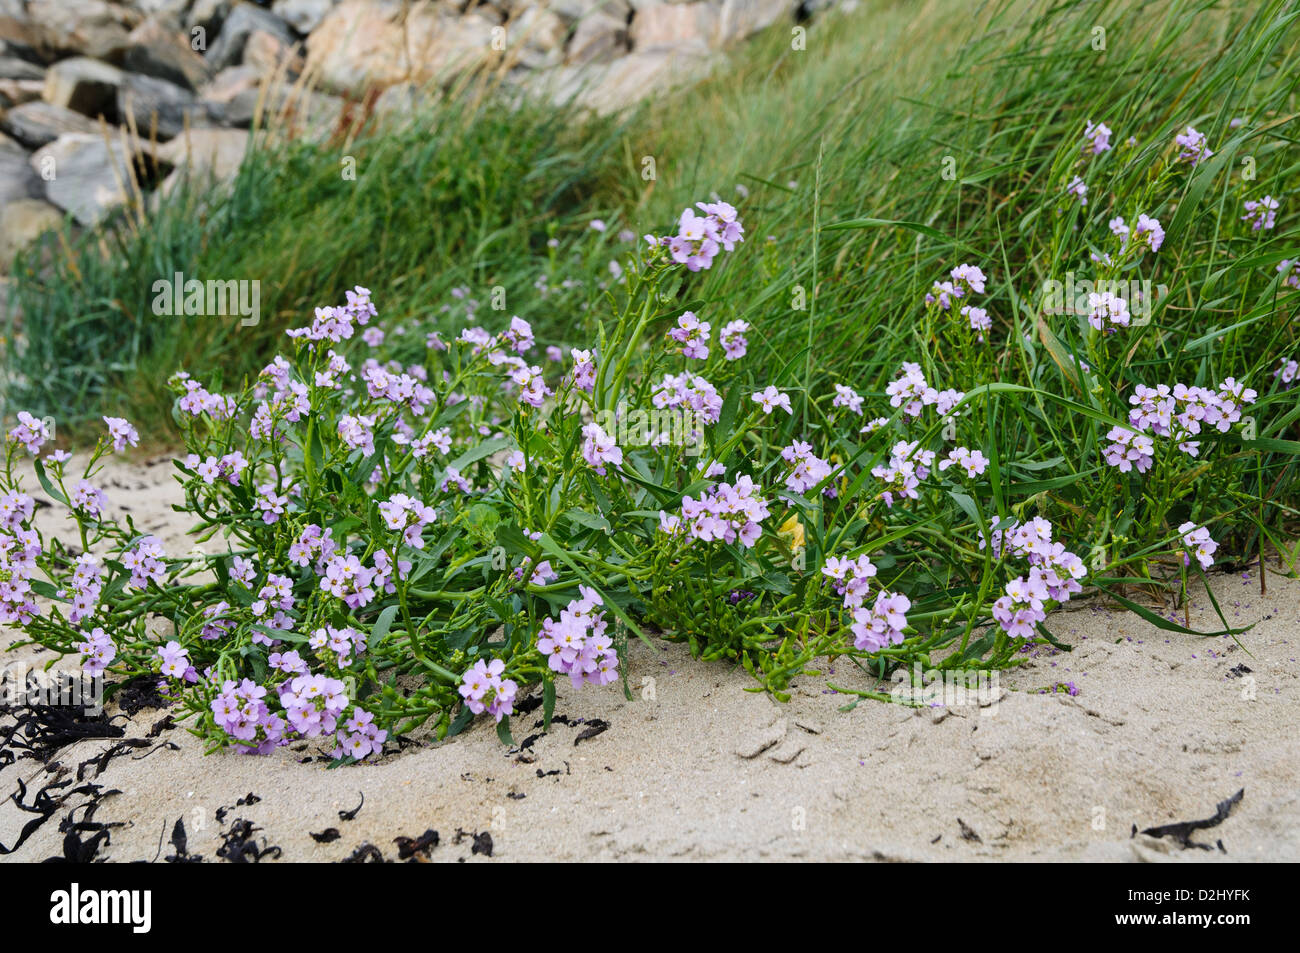 Northern Rock Cress (Arabis petraea) growing on the sandy shore of the Kyle of Tongue in Sutherland Scotland. August. Stock Photo